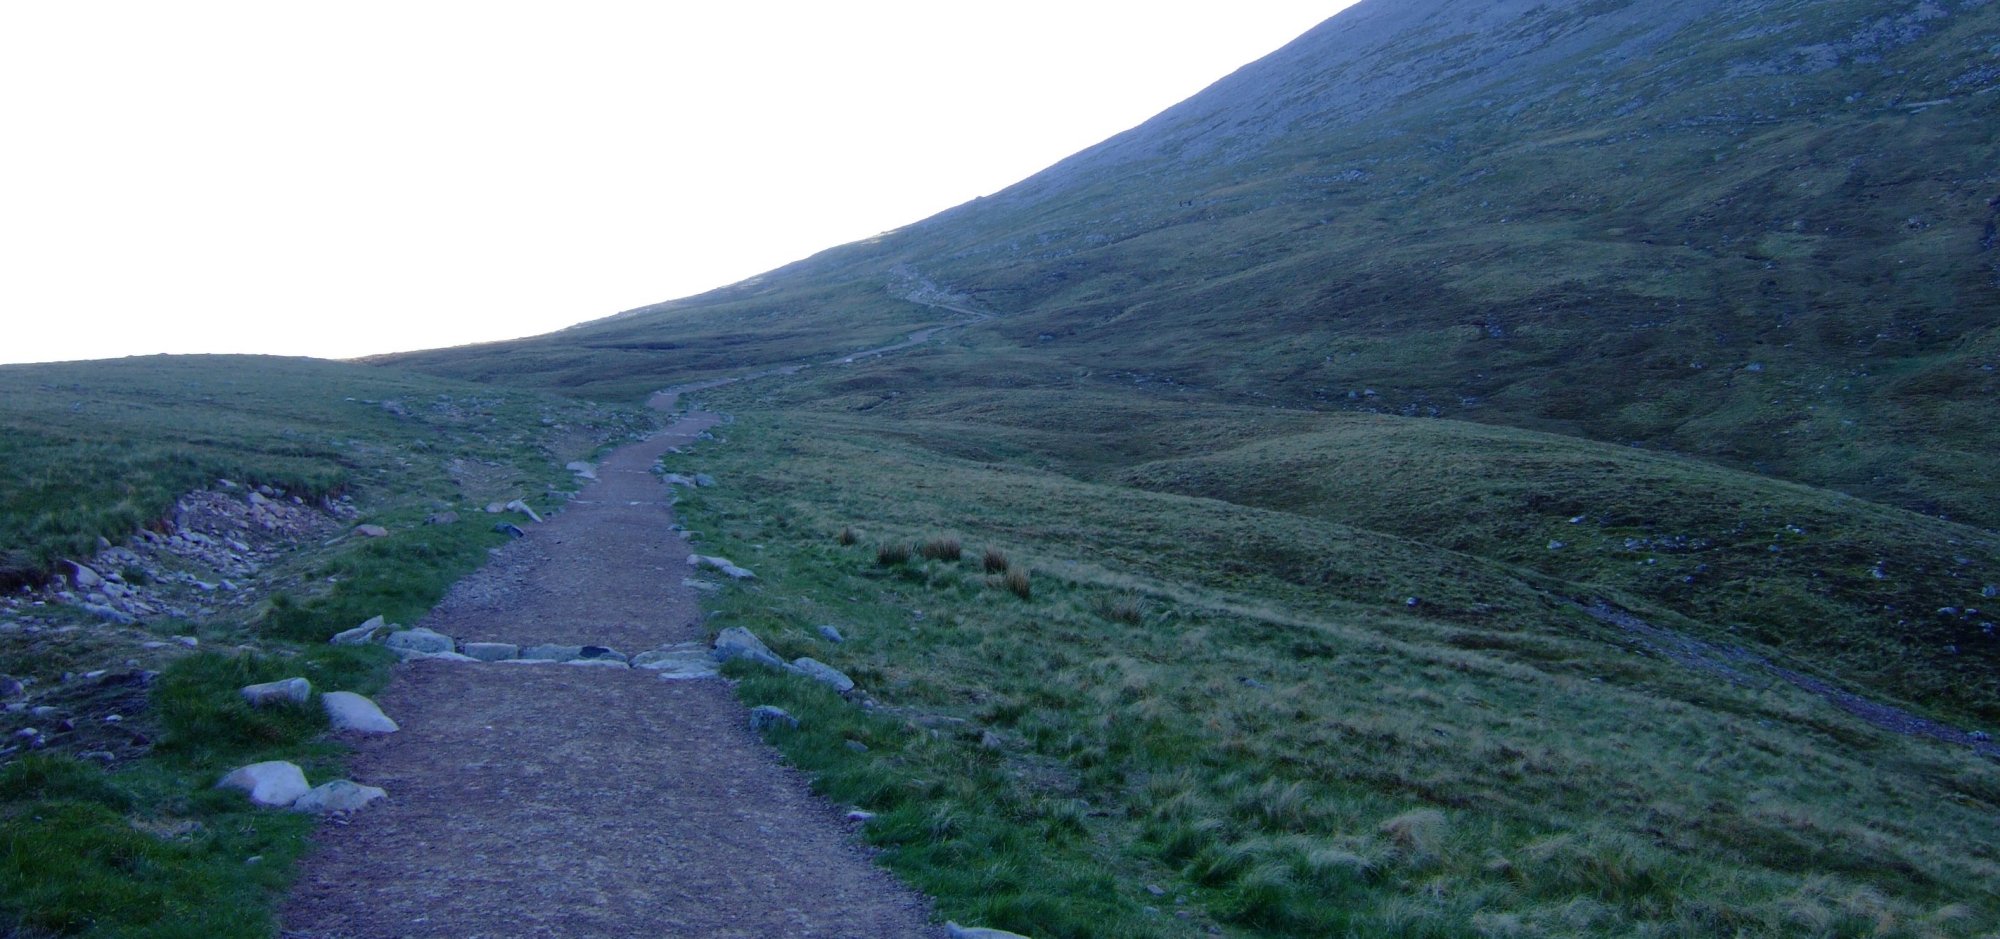 The path is shaded for most of the first half of the climb